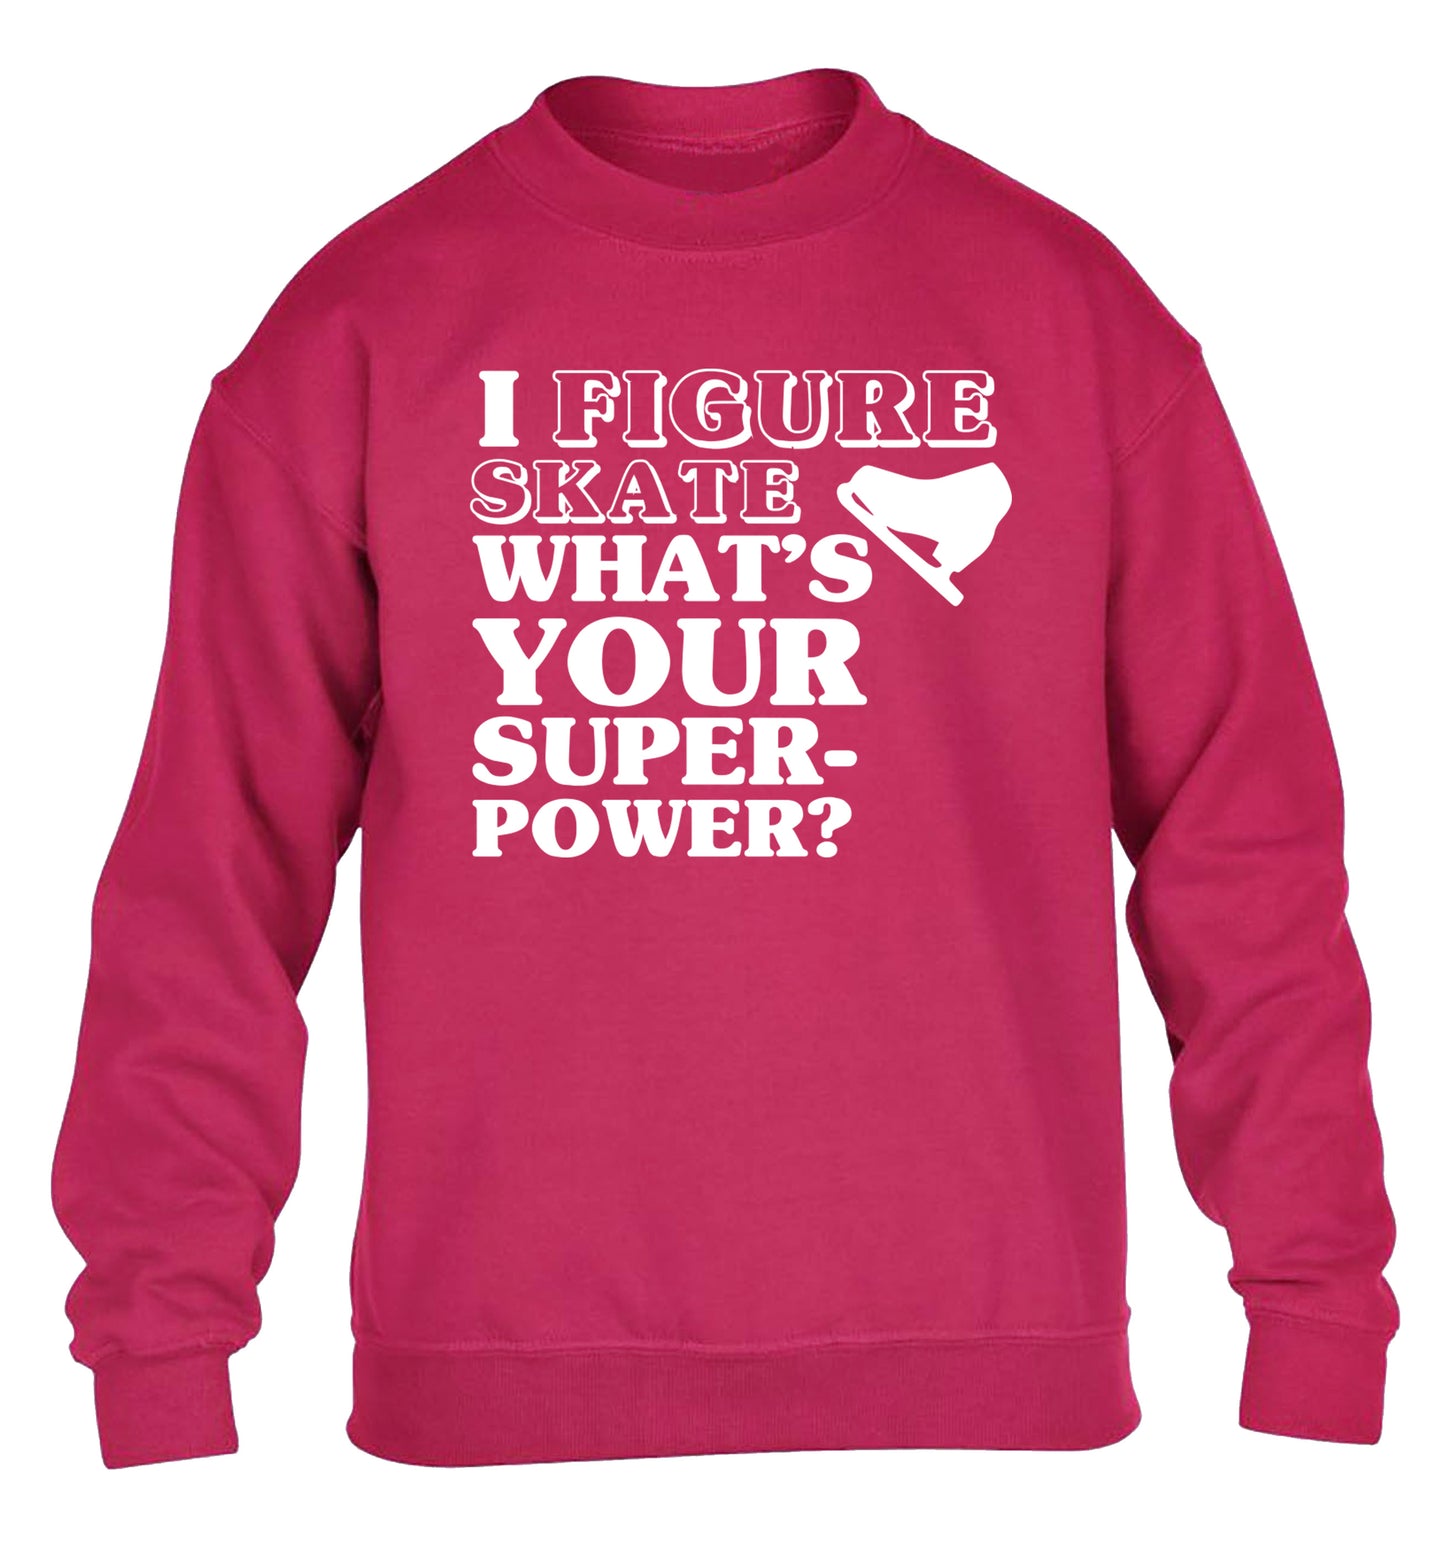 I figure skate what's your superpower? children's pink sweater 12-14 Years